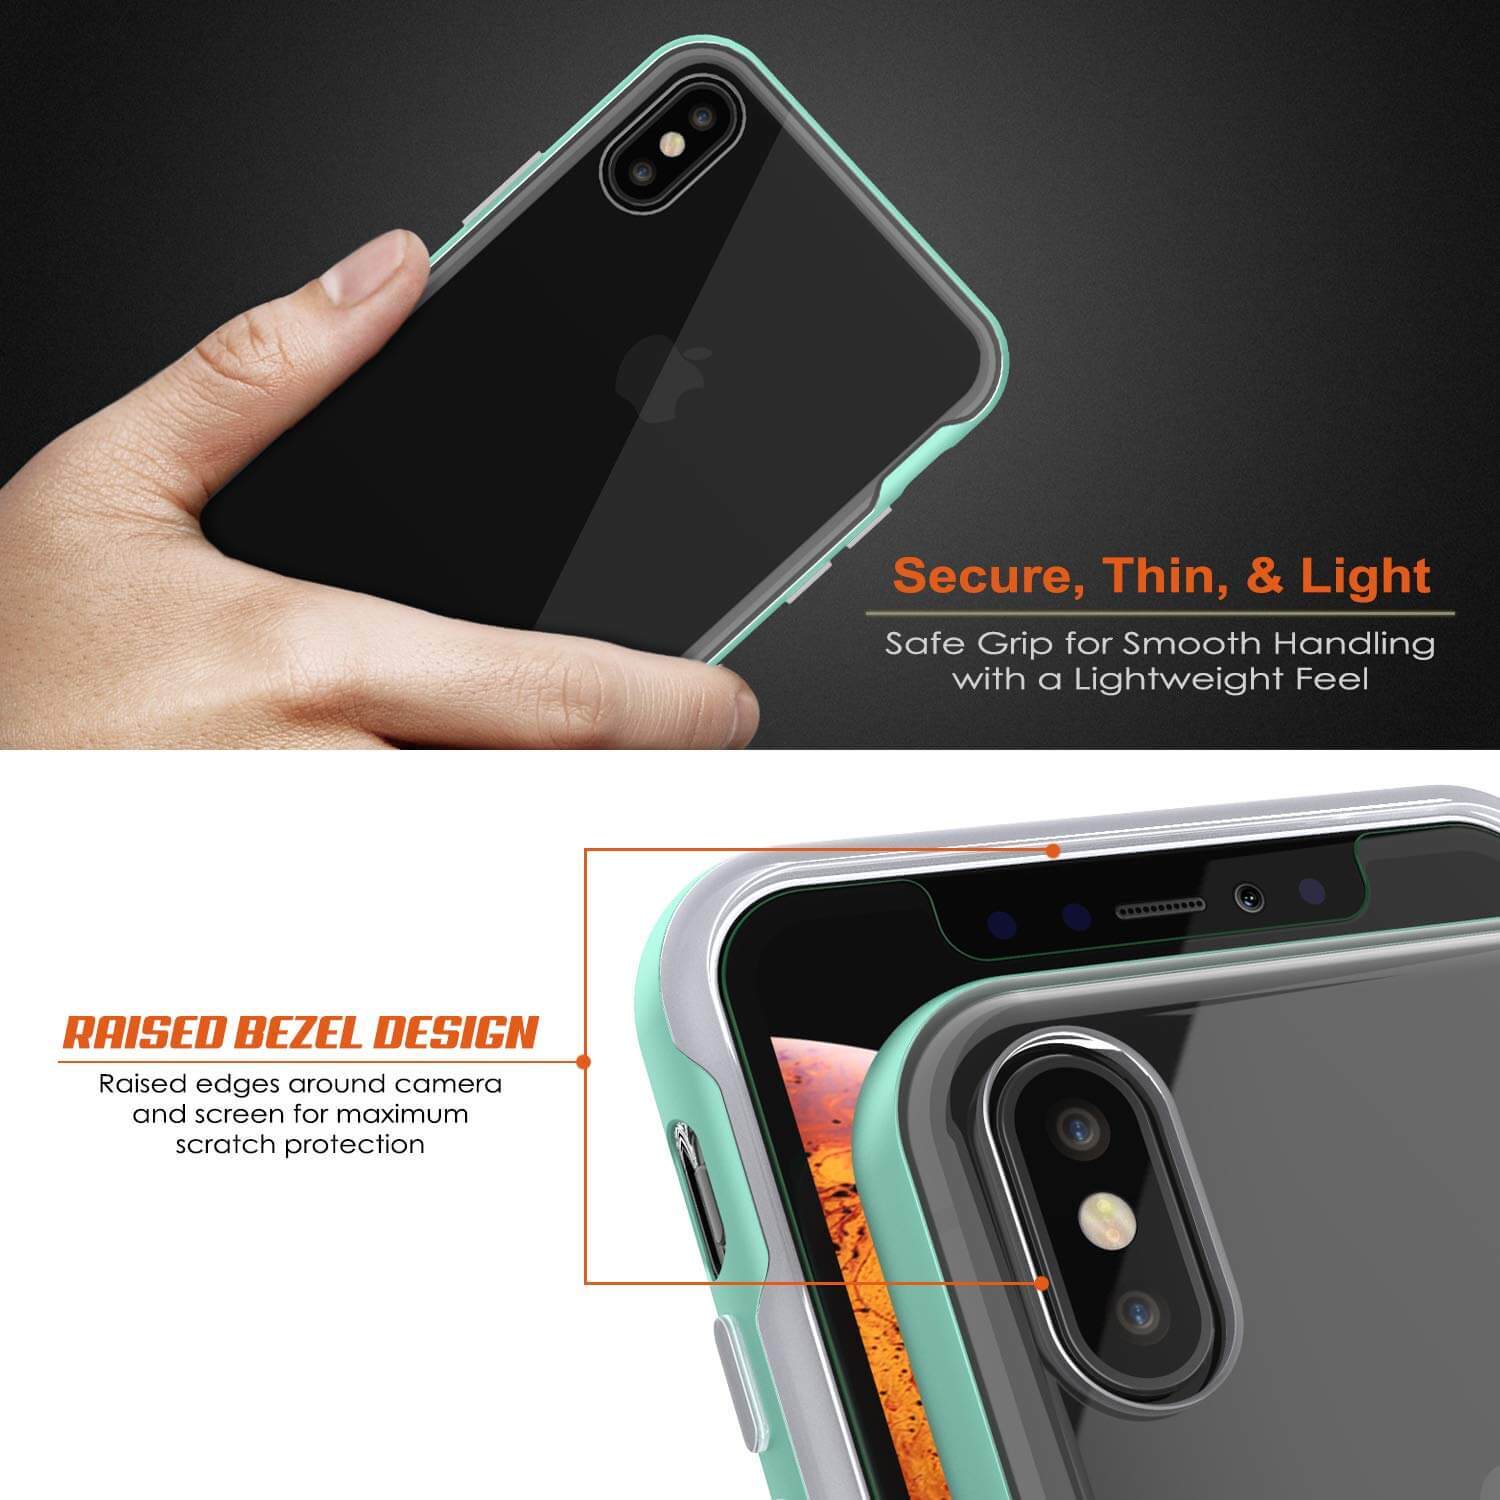 iPhone X Case, PUNKcase [LUCID 3.0 Series] [Slim Fit] Armor Cover w/ Integrated Screen Protector [Teal]